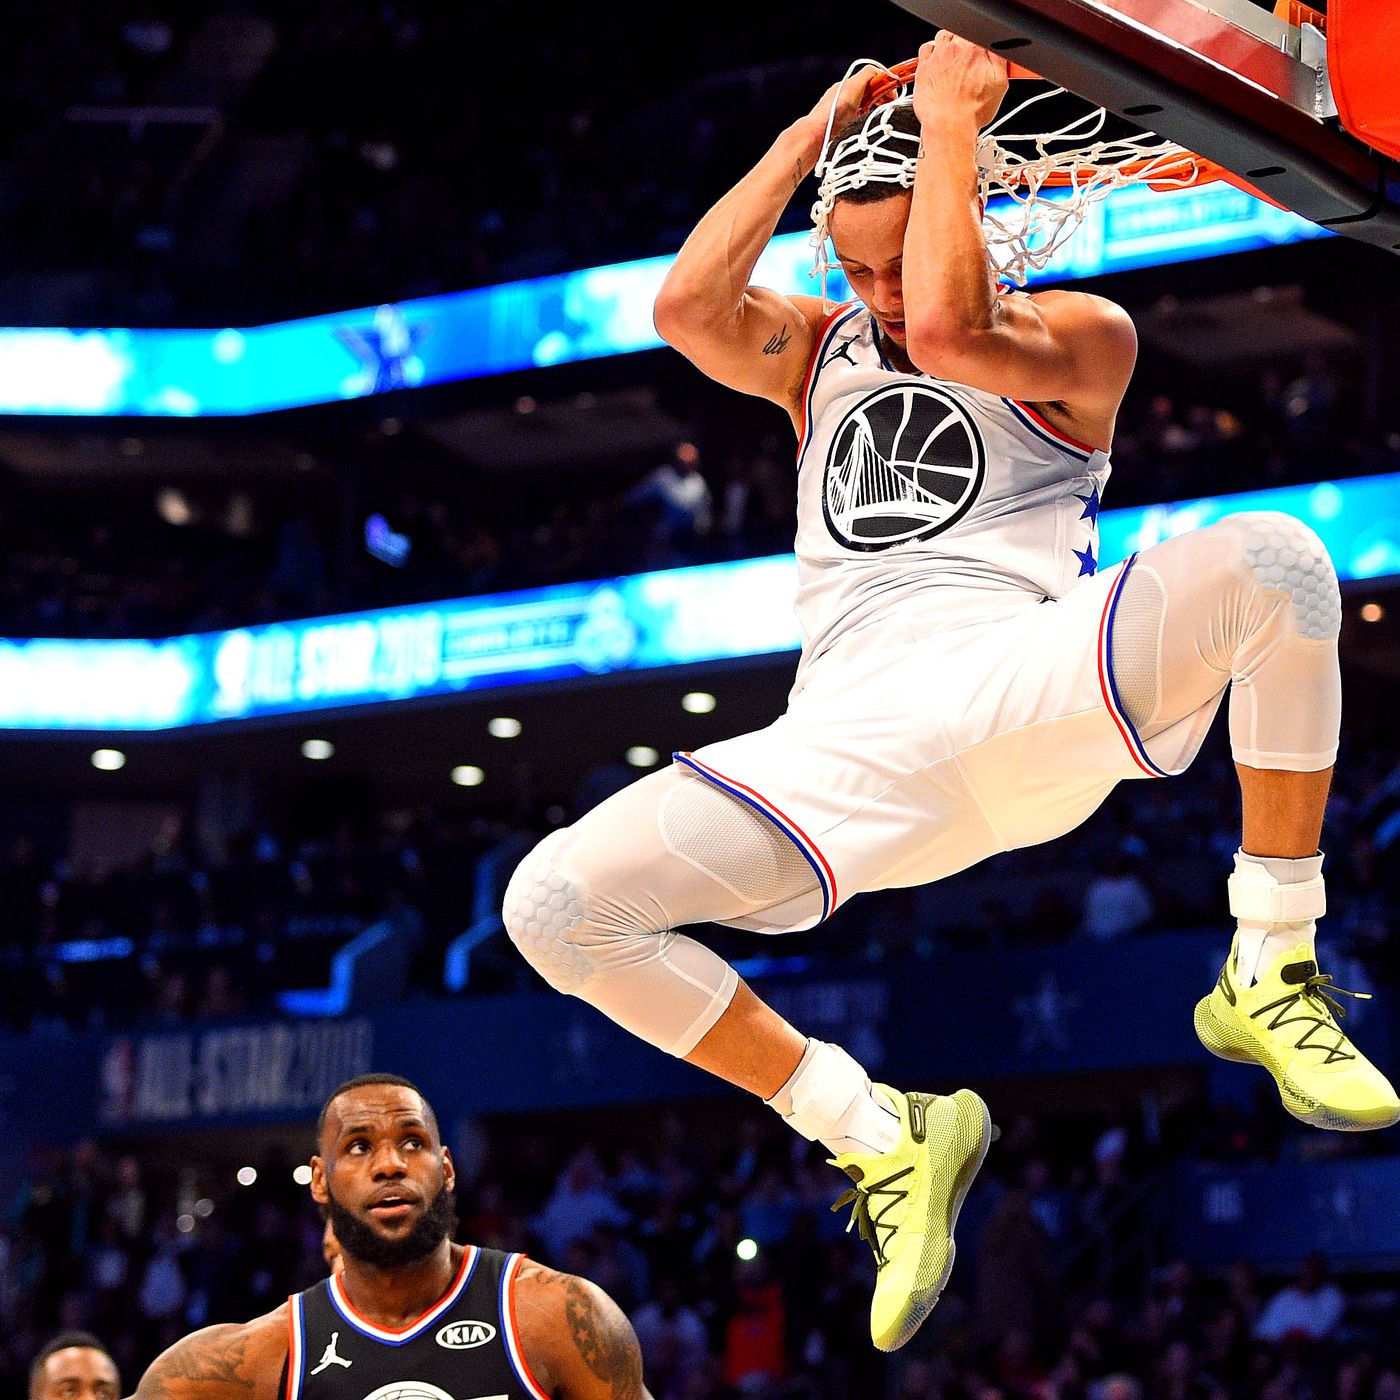 Stephen Curry's All Star Game Ending Dunk Shocked Everyone, Especially Team LeBron